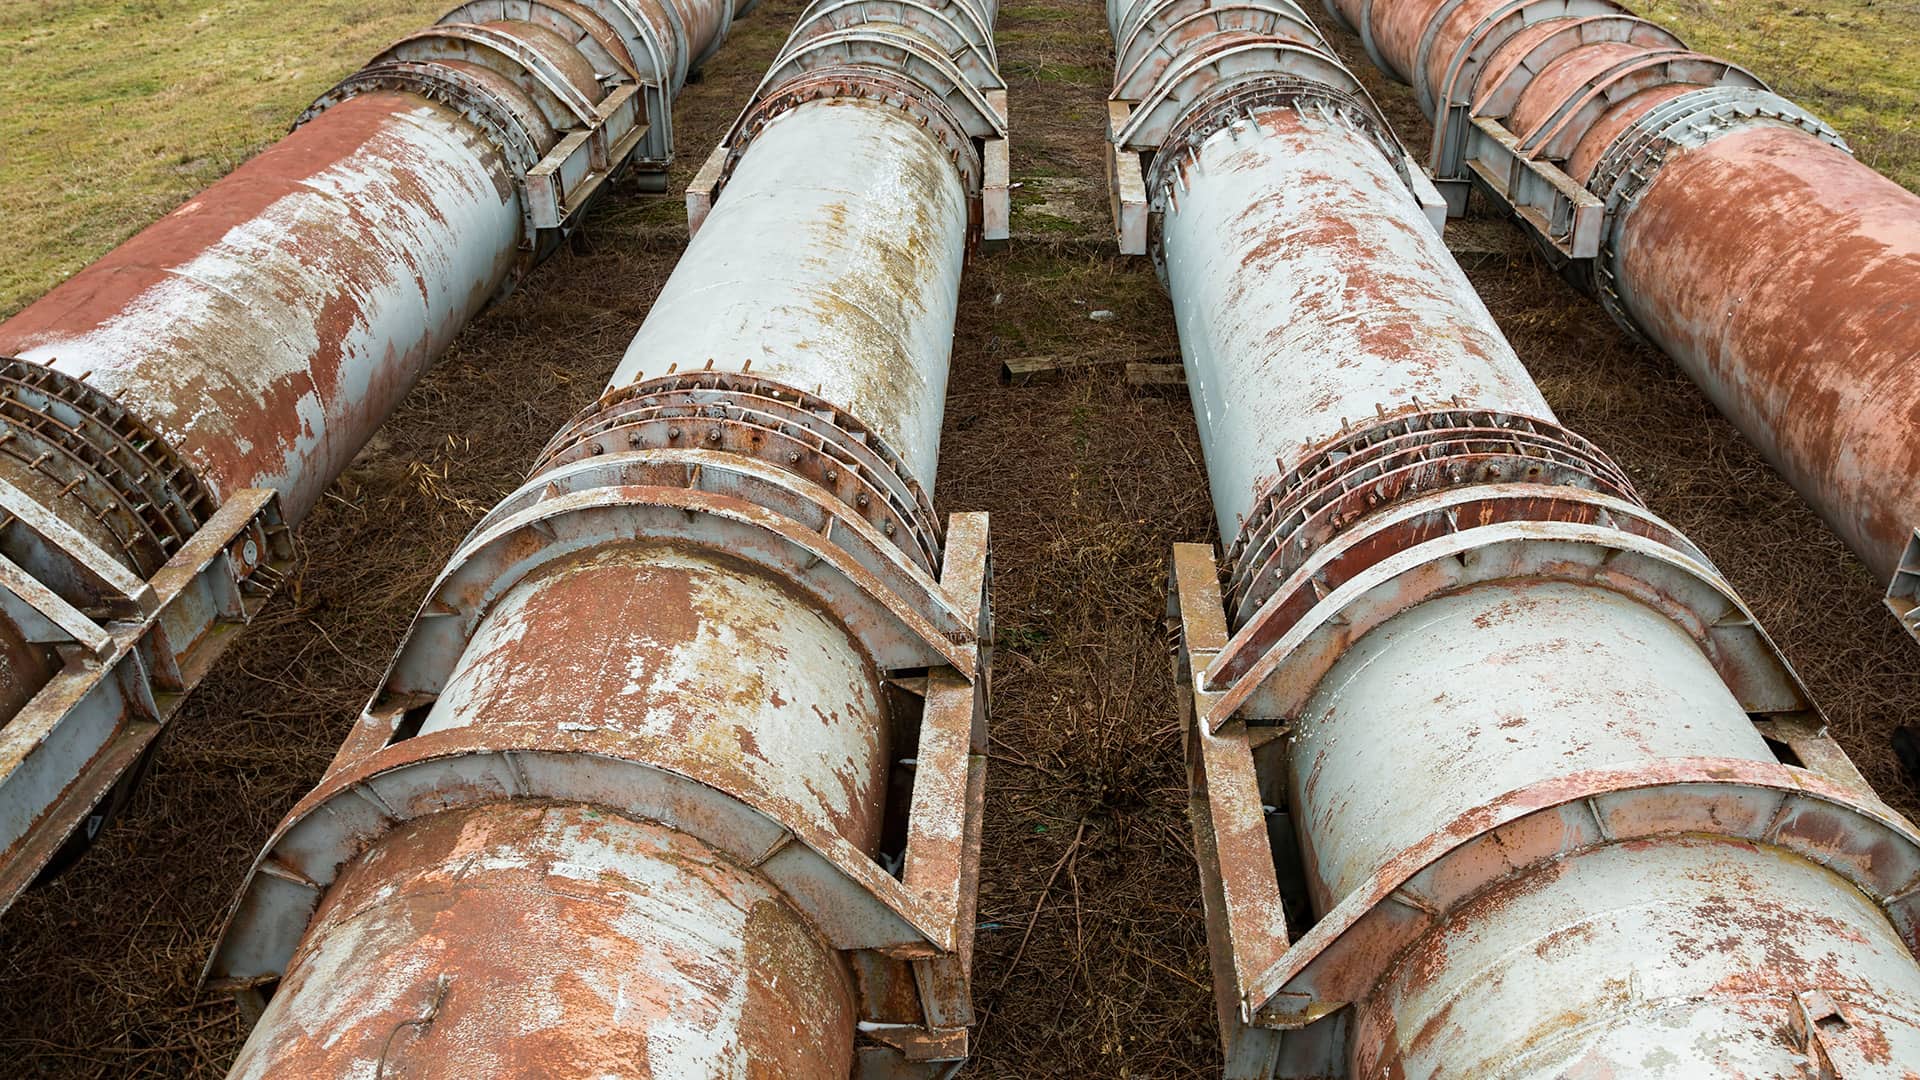 Fastest Way to Move Natural Gas is Through Pipelines Undetected Leaks (Oxygen Ingress) Can Damage Them!